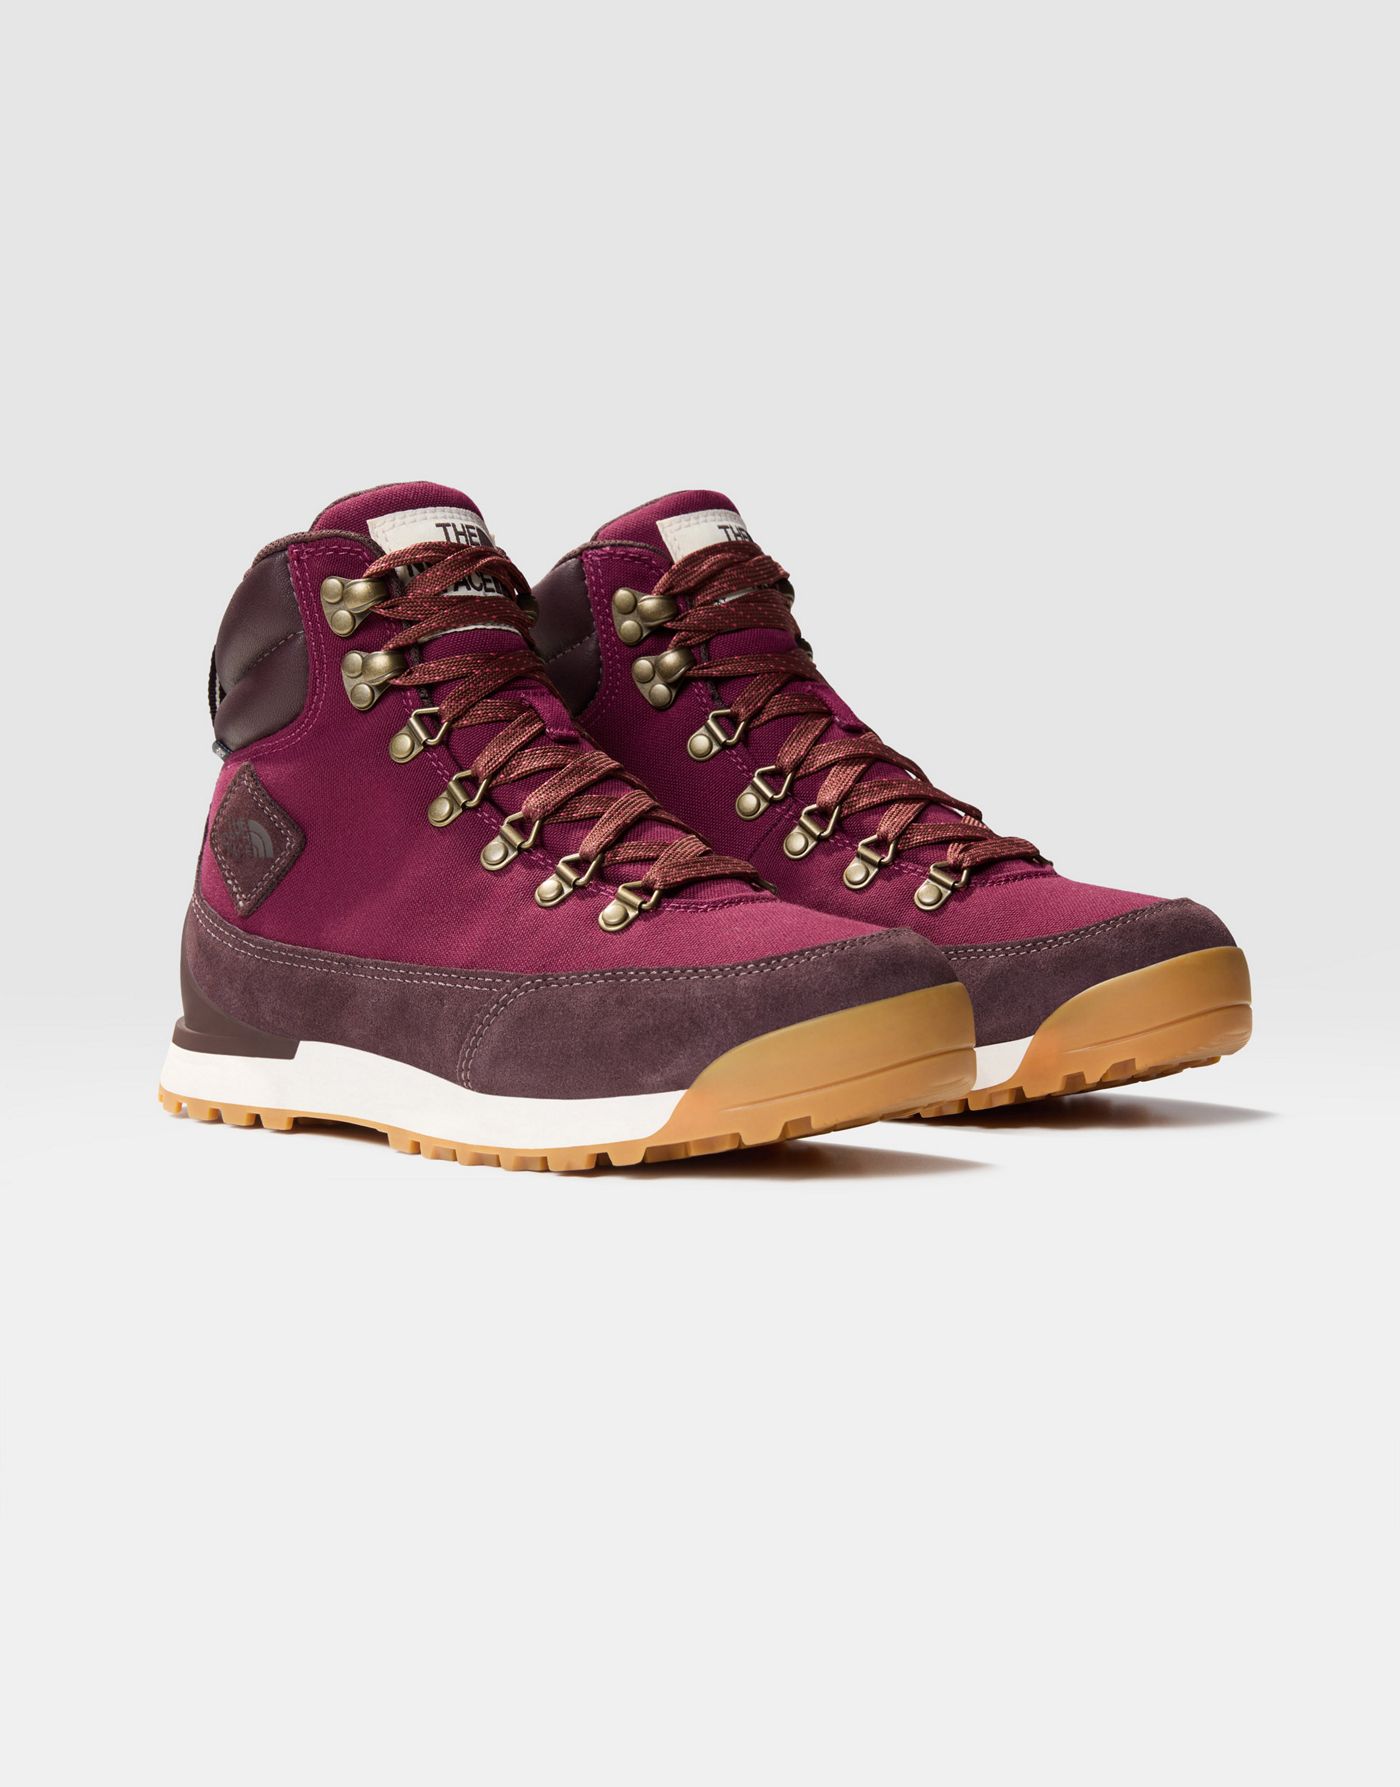 The North Face Back-to-berkeley iv textile lifestyle boots in coal brown